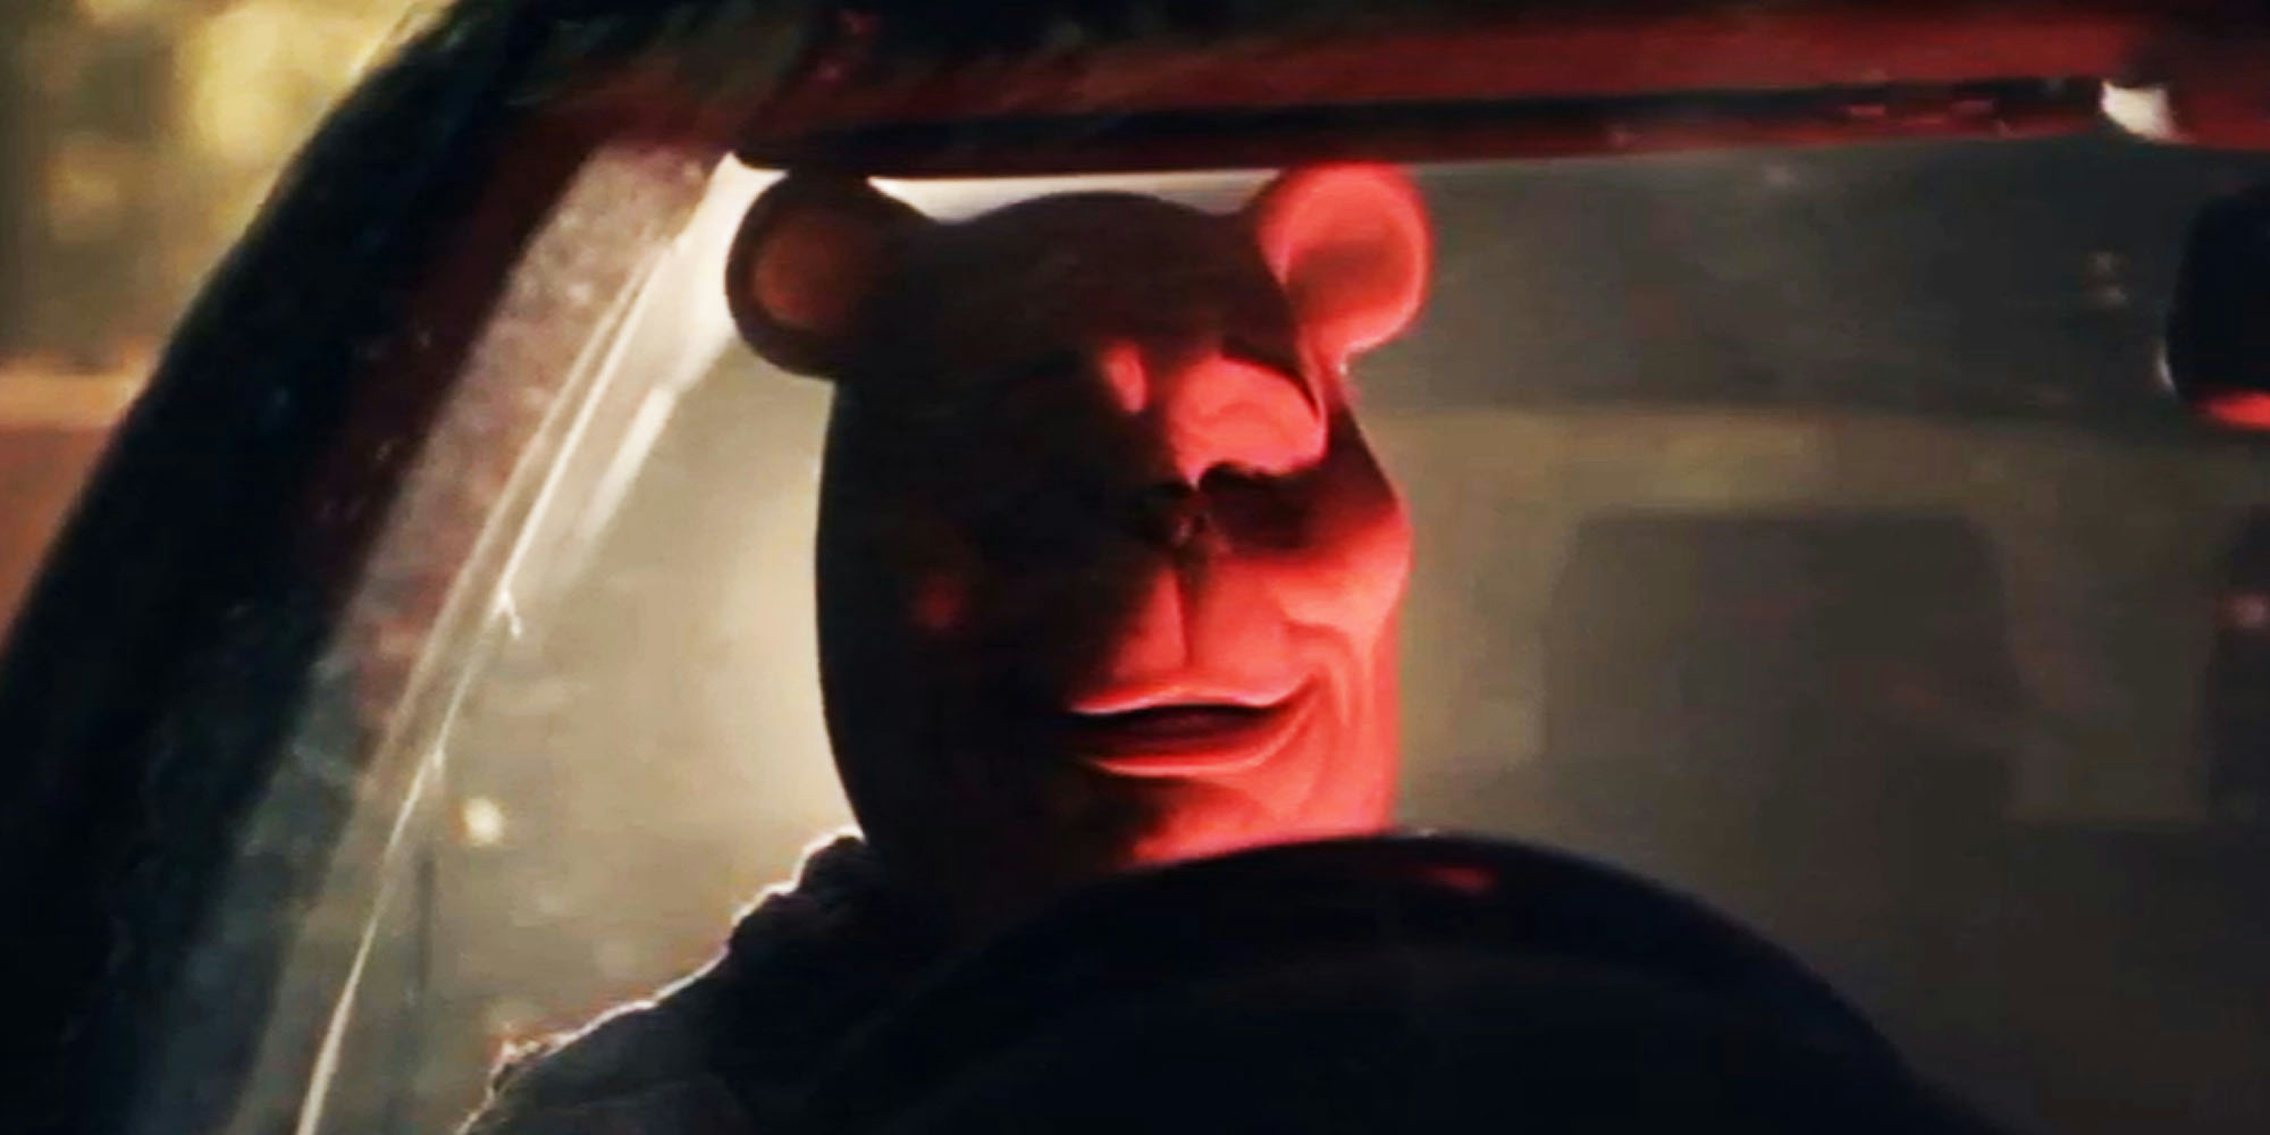 How the Winnie-the-Pooh: Blood and Honey Horror Movie Even Exists